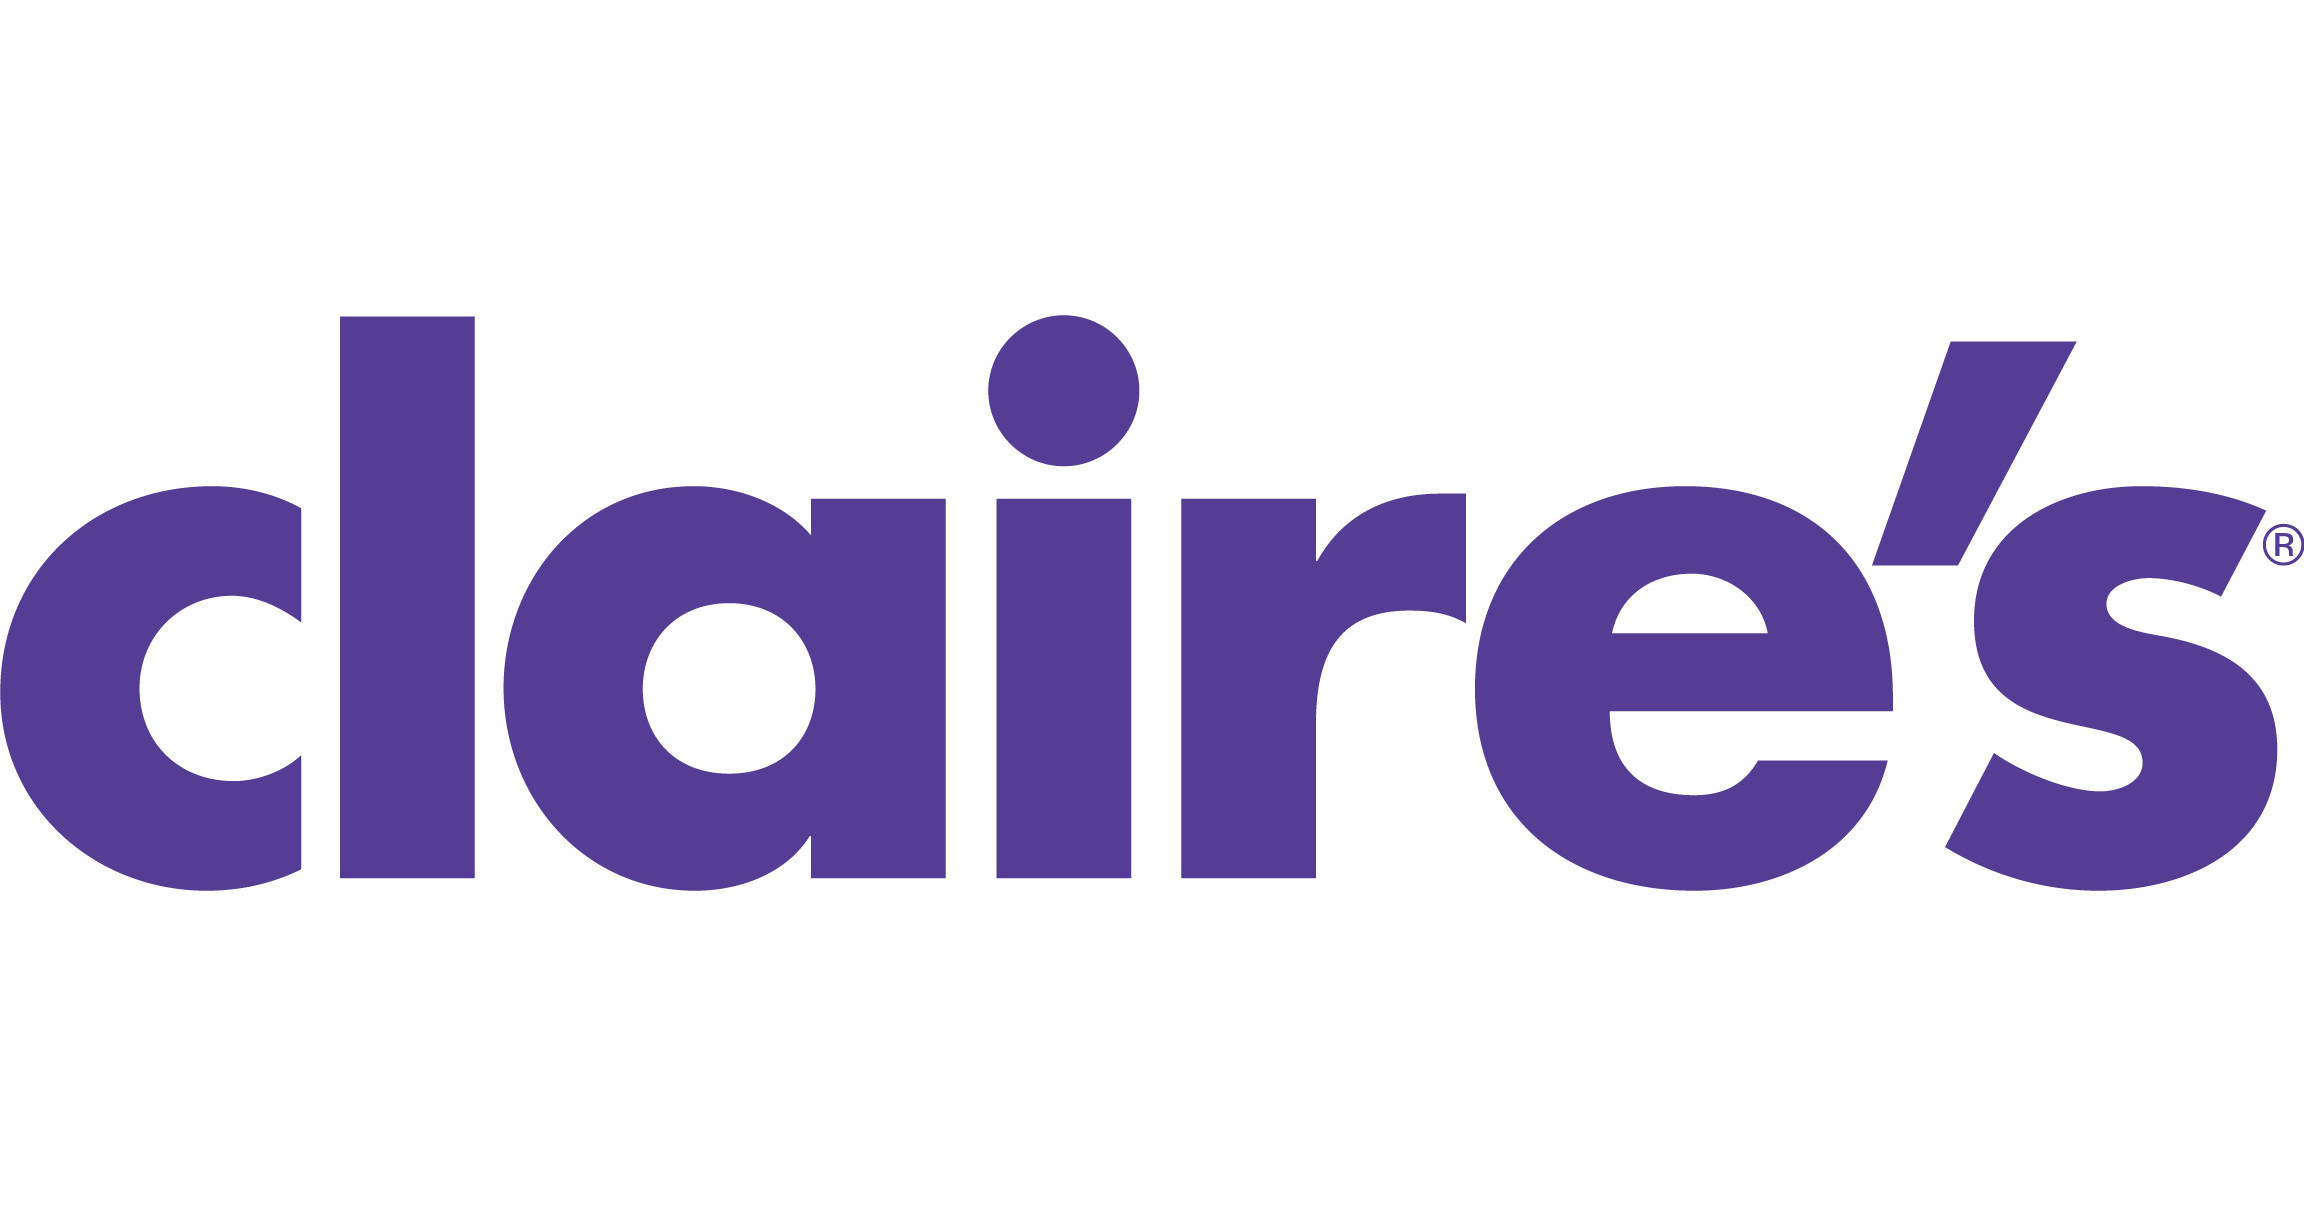 Claire's: latest news, analysis and trading updates